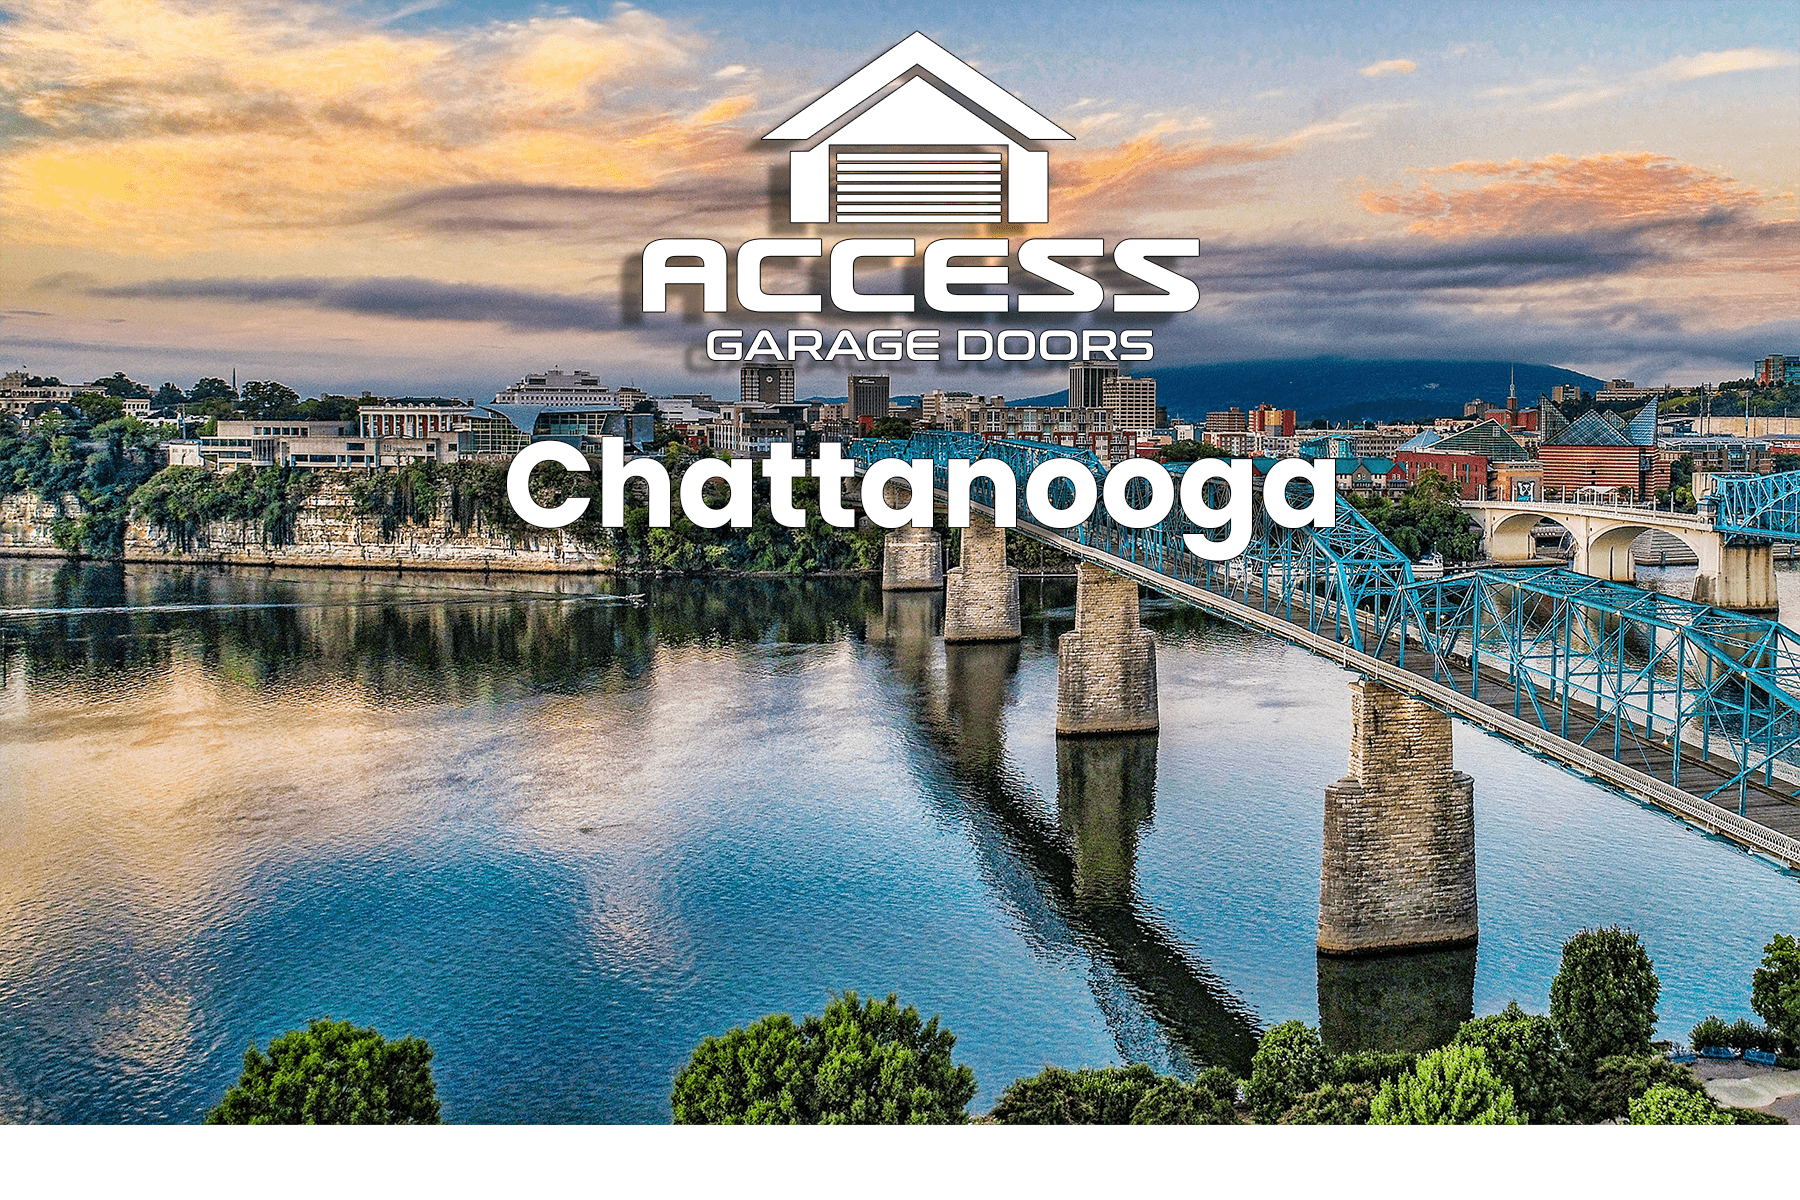 Chattanooga first Access Garage Doors location